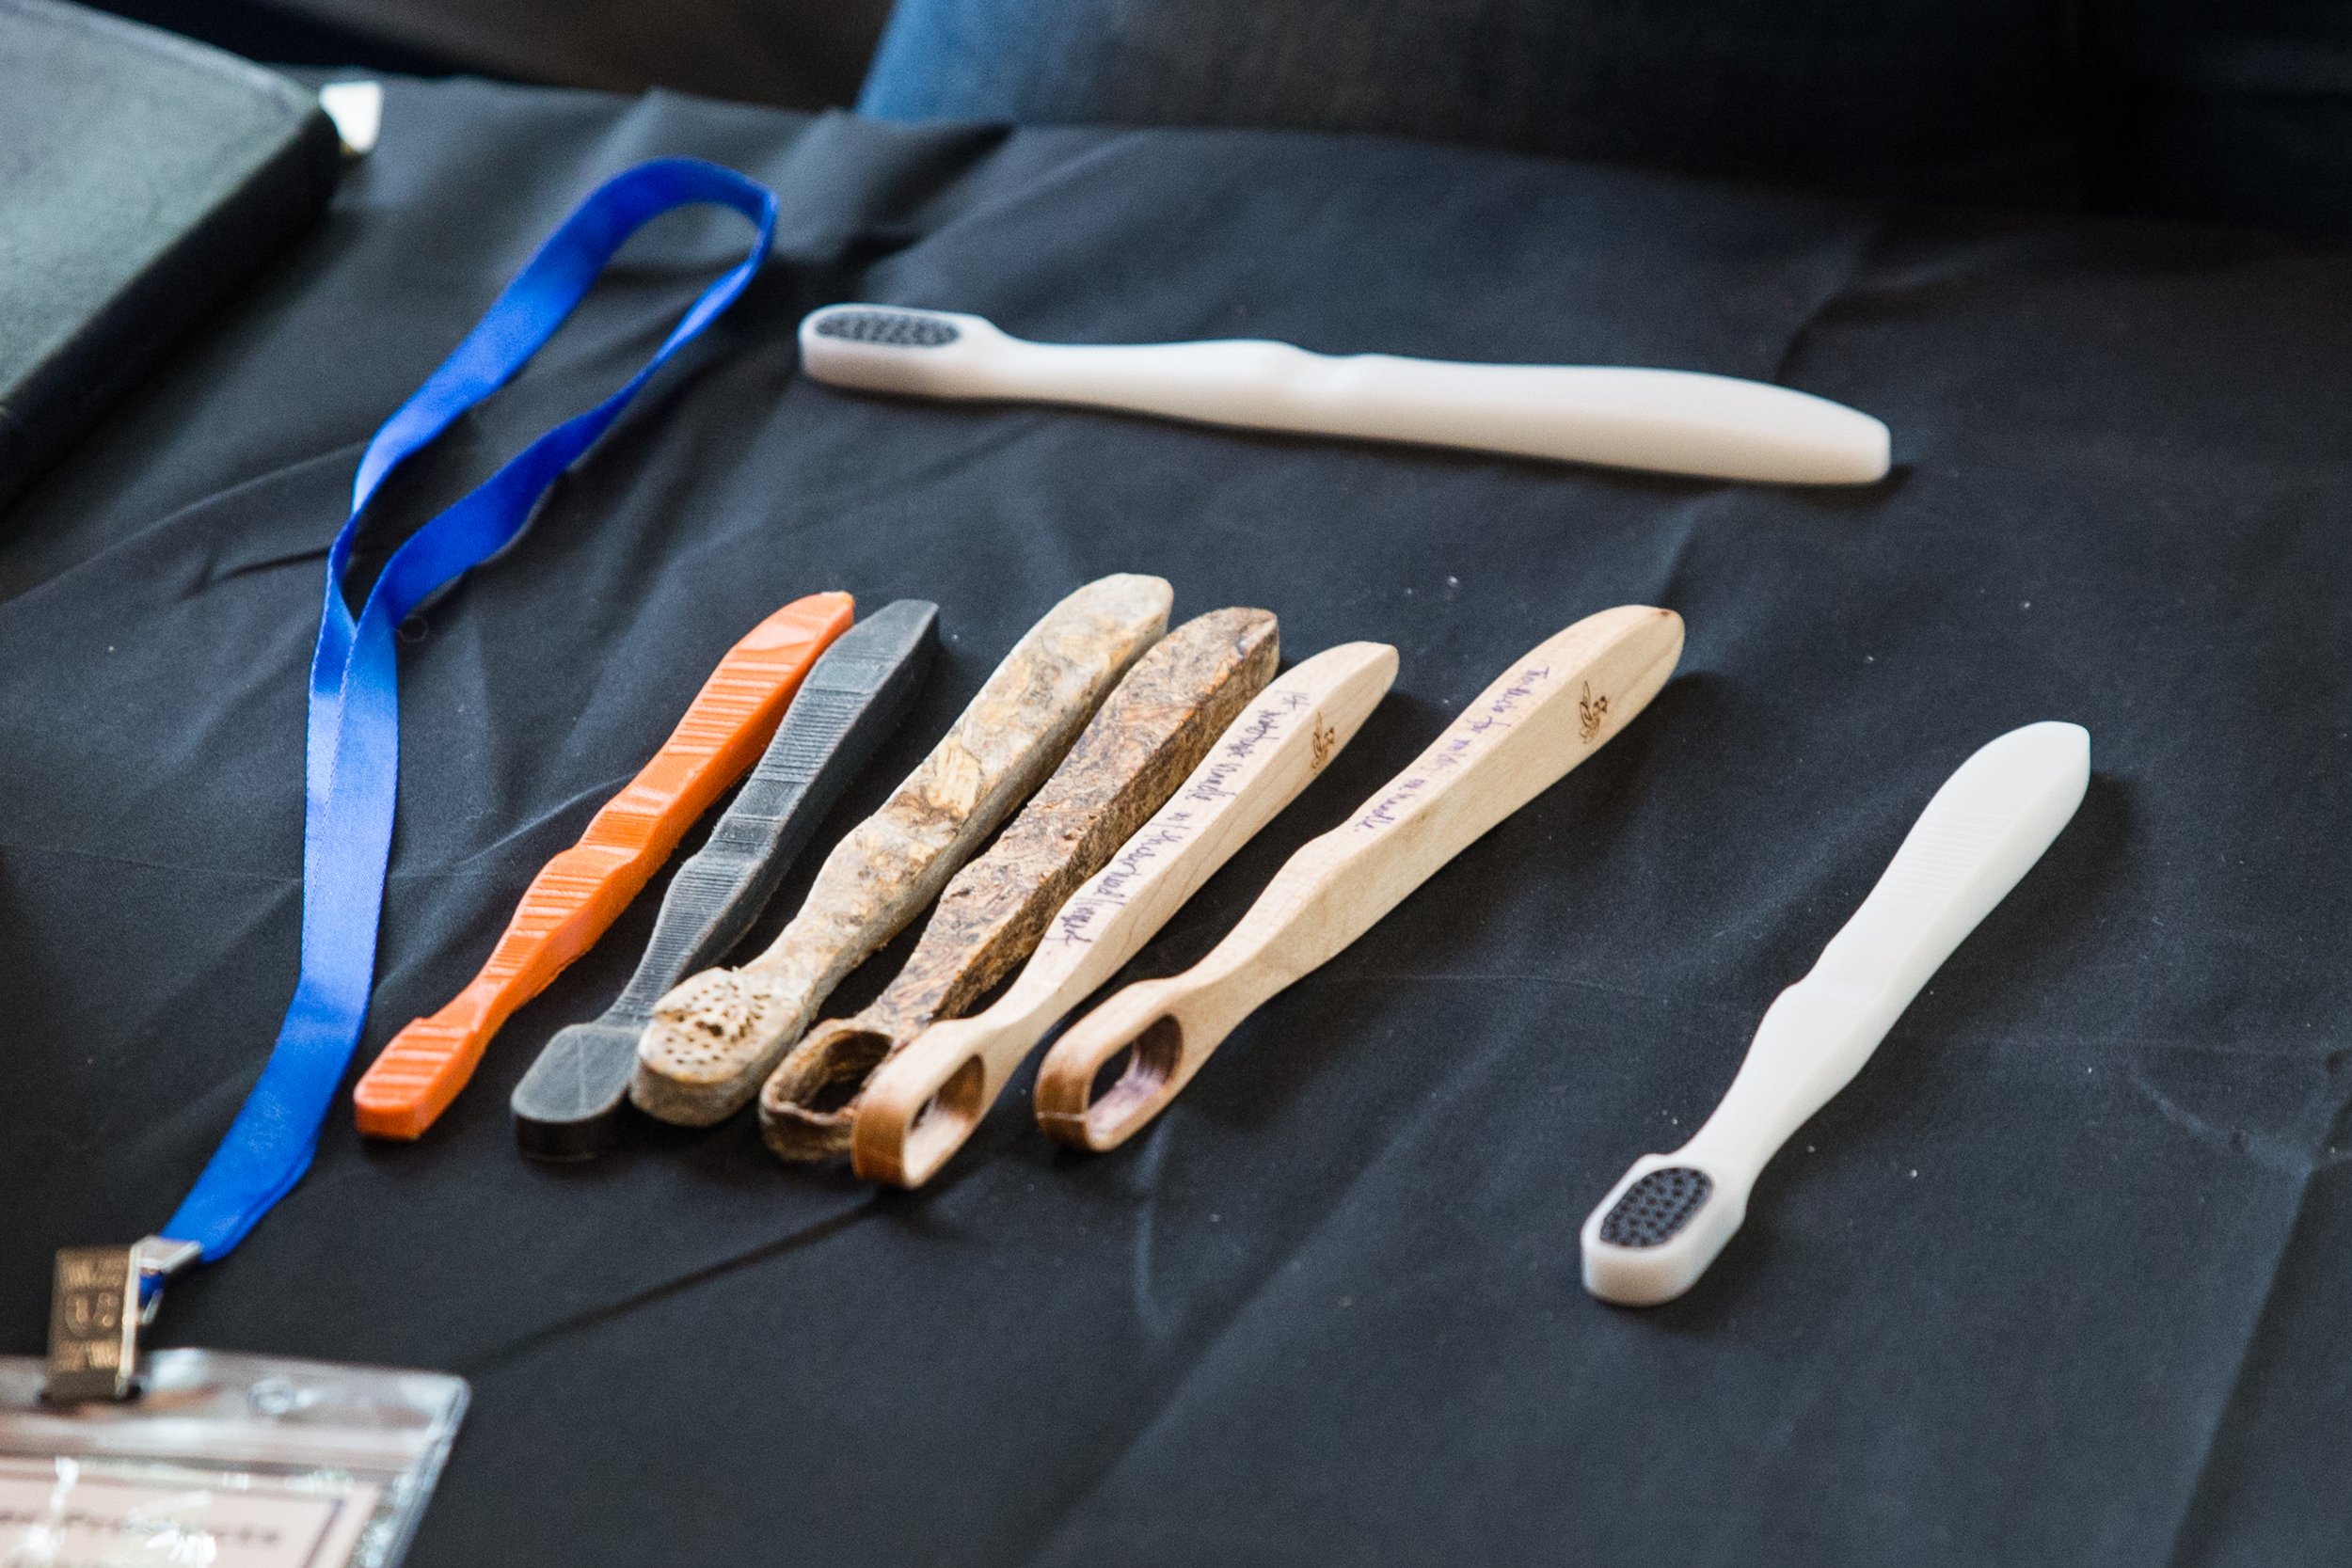  Waste-reducing toothbrush prototypes at the Be Better Products 